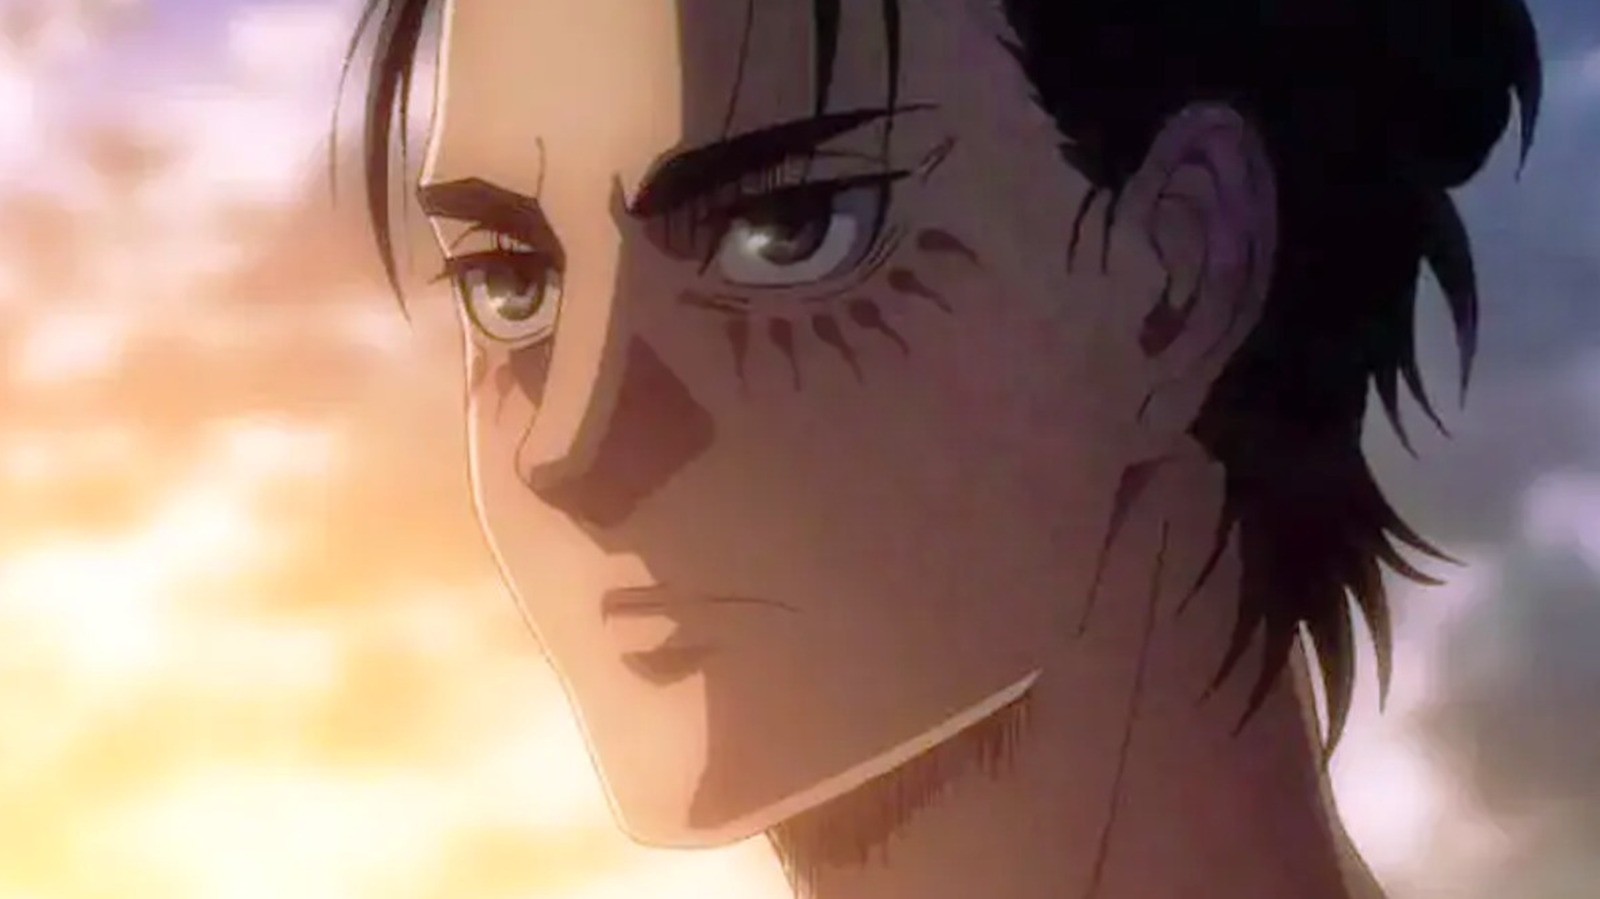 Attack on Titan Comes to An End This Fall